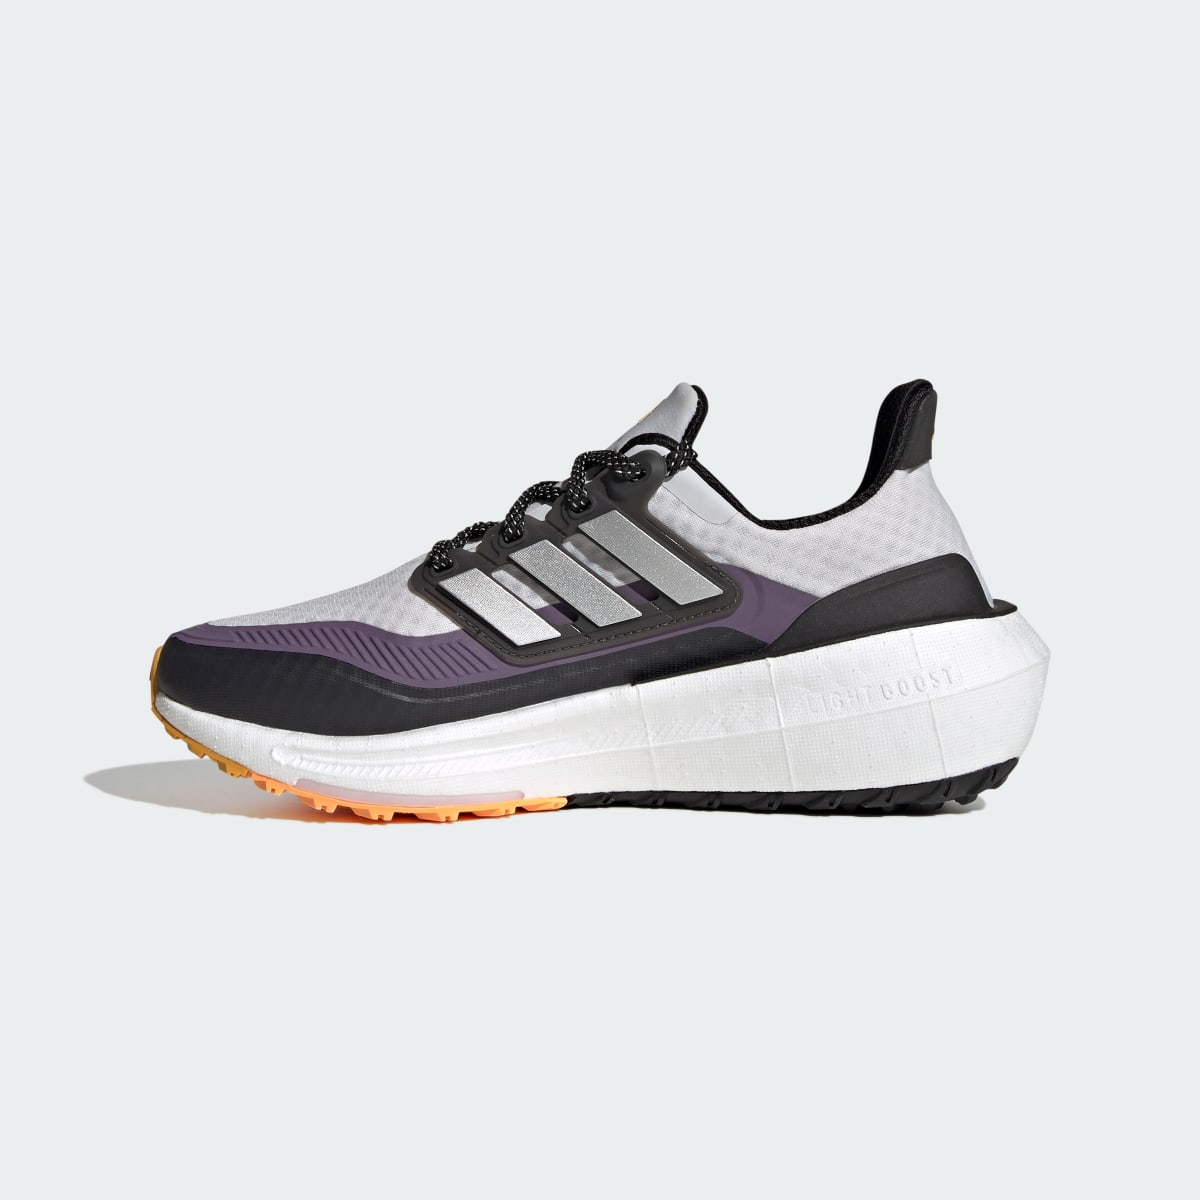 Adidas Ultraboost Light COLD.RDY 2.0 Shoes. 7